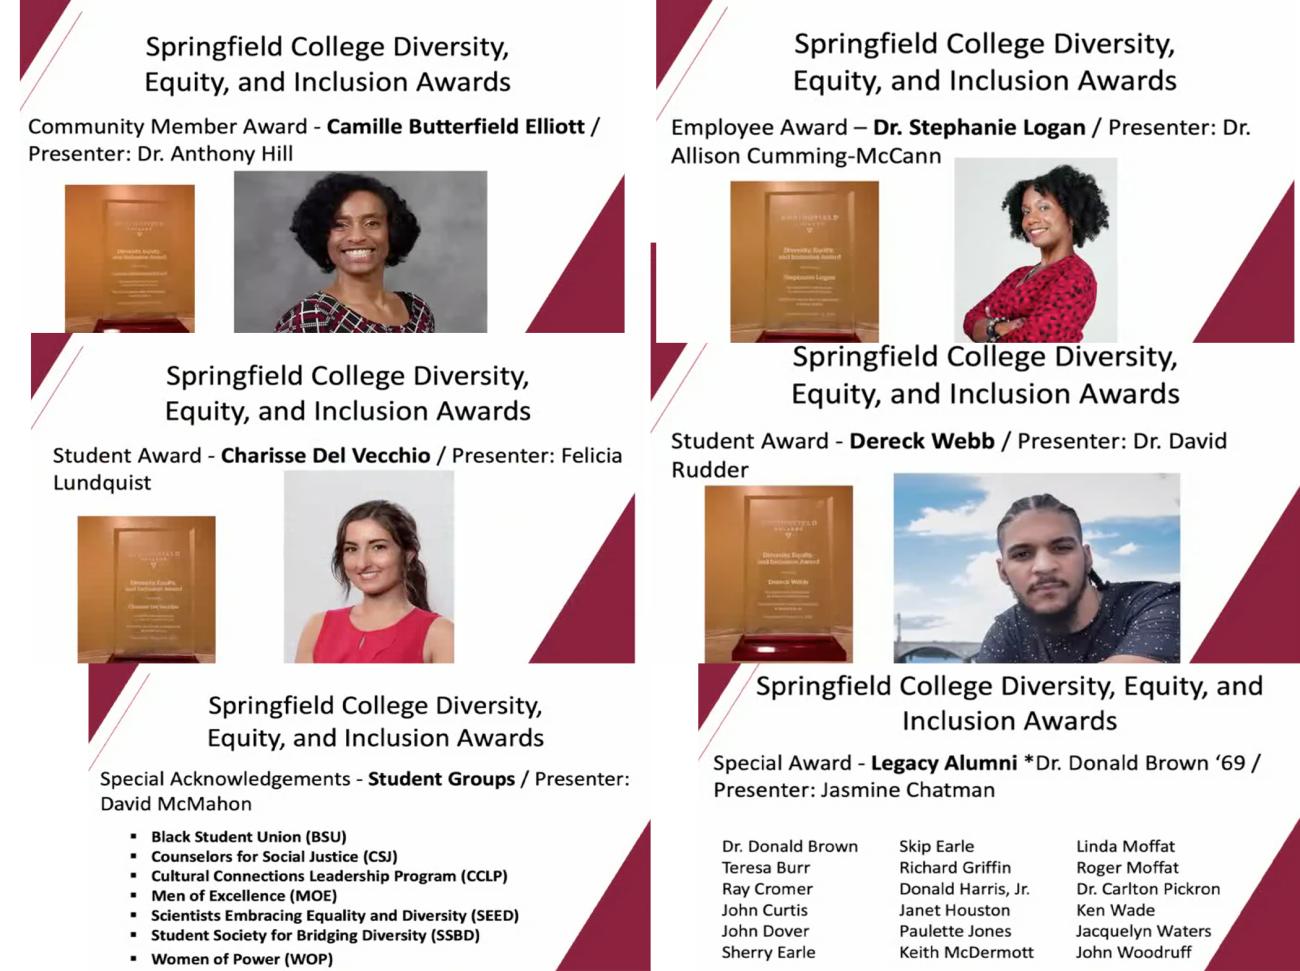 As part of the Springfield College eighth annual Martin Luther King Jr. Lecture, the third annual Springfield College Diversity, Equity, and Inclusion Awards were presented to members and student-groups within the Springfield College community, as well as the Springfield community. The awards recognize those who have made a significant contribution to diversity and inclusion on campus or in the Springfield community.